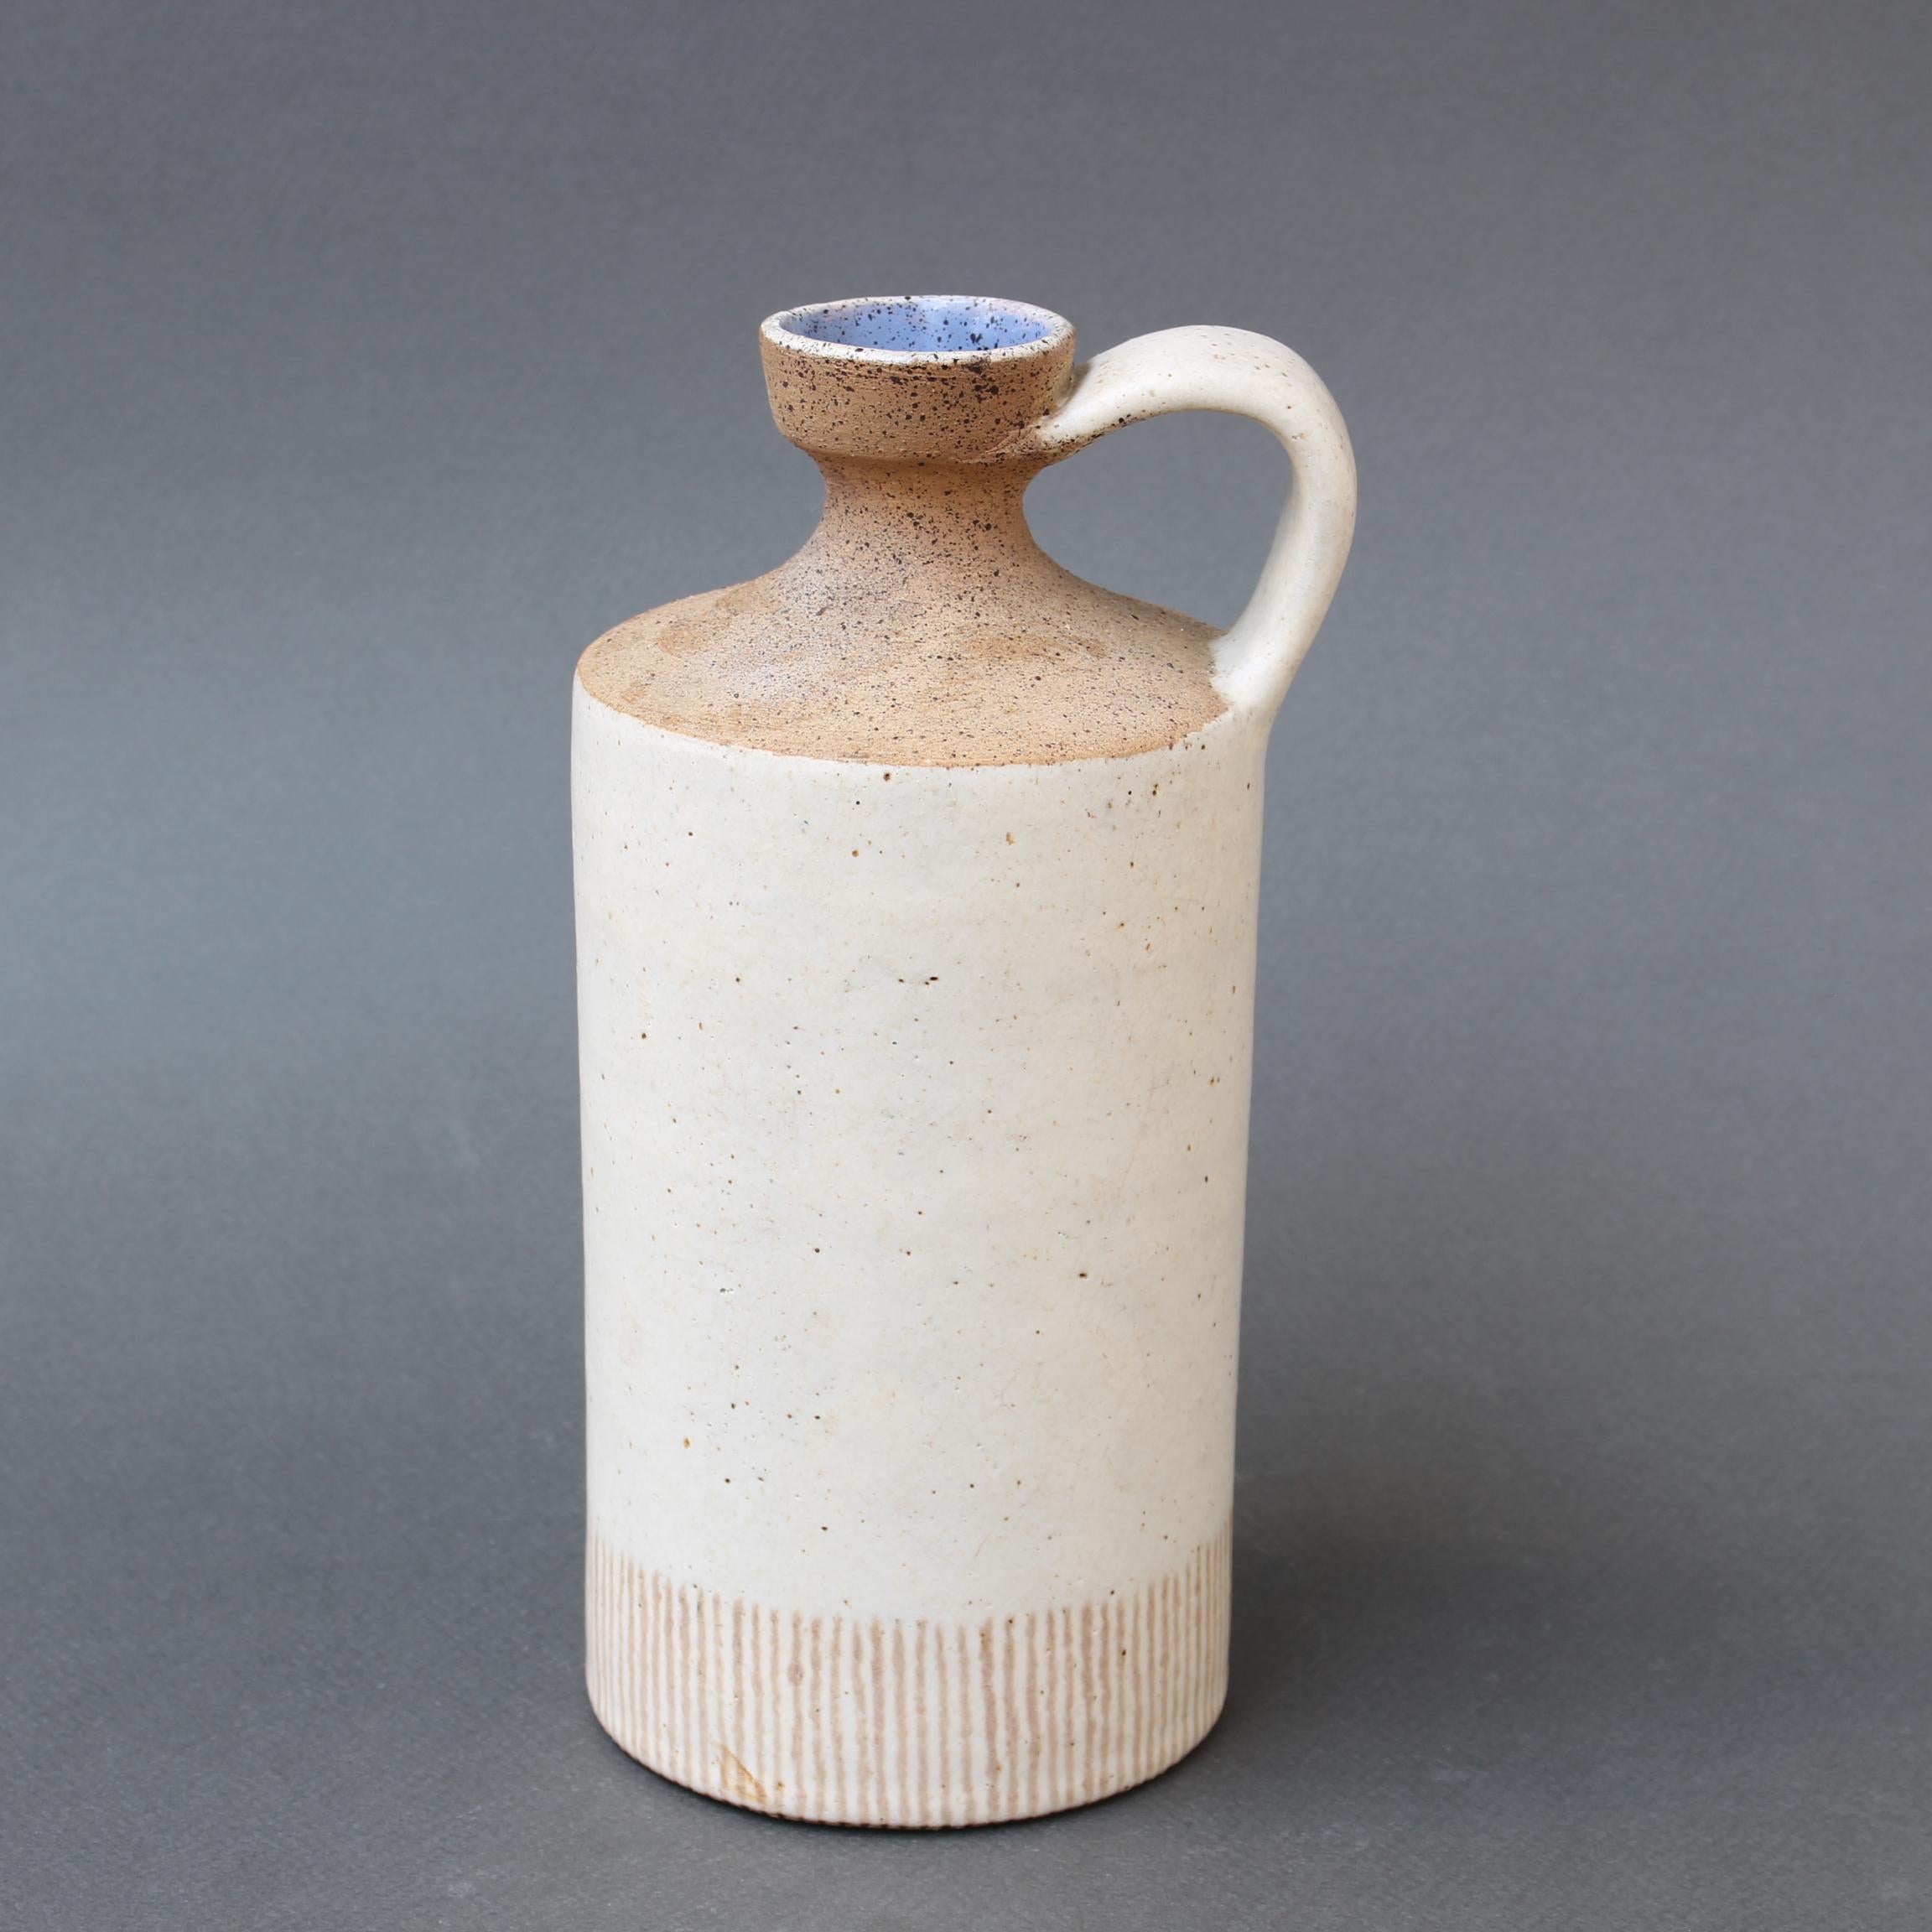 Italian ceramic decorative jug / vase by Bruno Gambone (circa 1970s). The vessel has a purity of form, muted colour and demonstrated effortless beauty that is only created by Bruno Gambone. He transforms earthenware ceramics into works of art. With